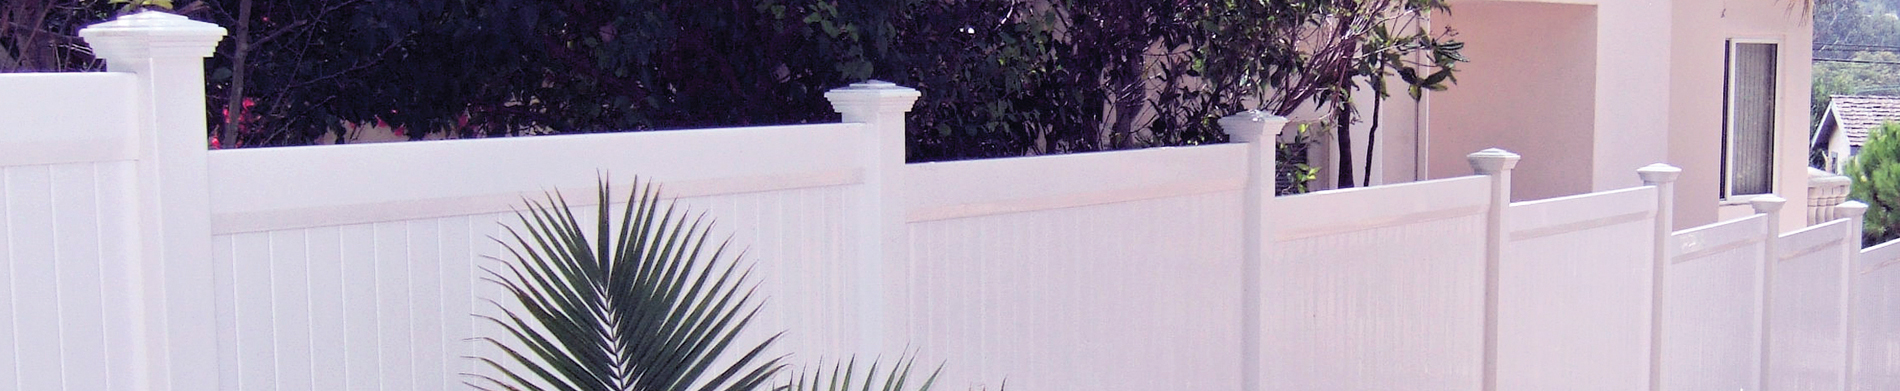 Install a vinyl privacy fence and make your neighbors envious